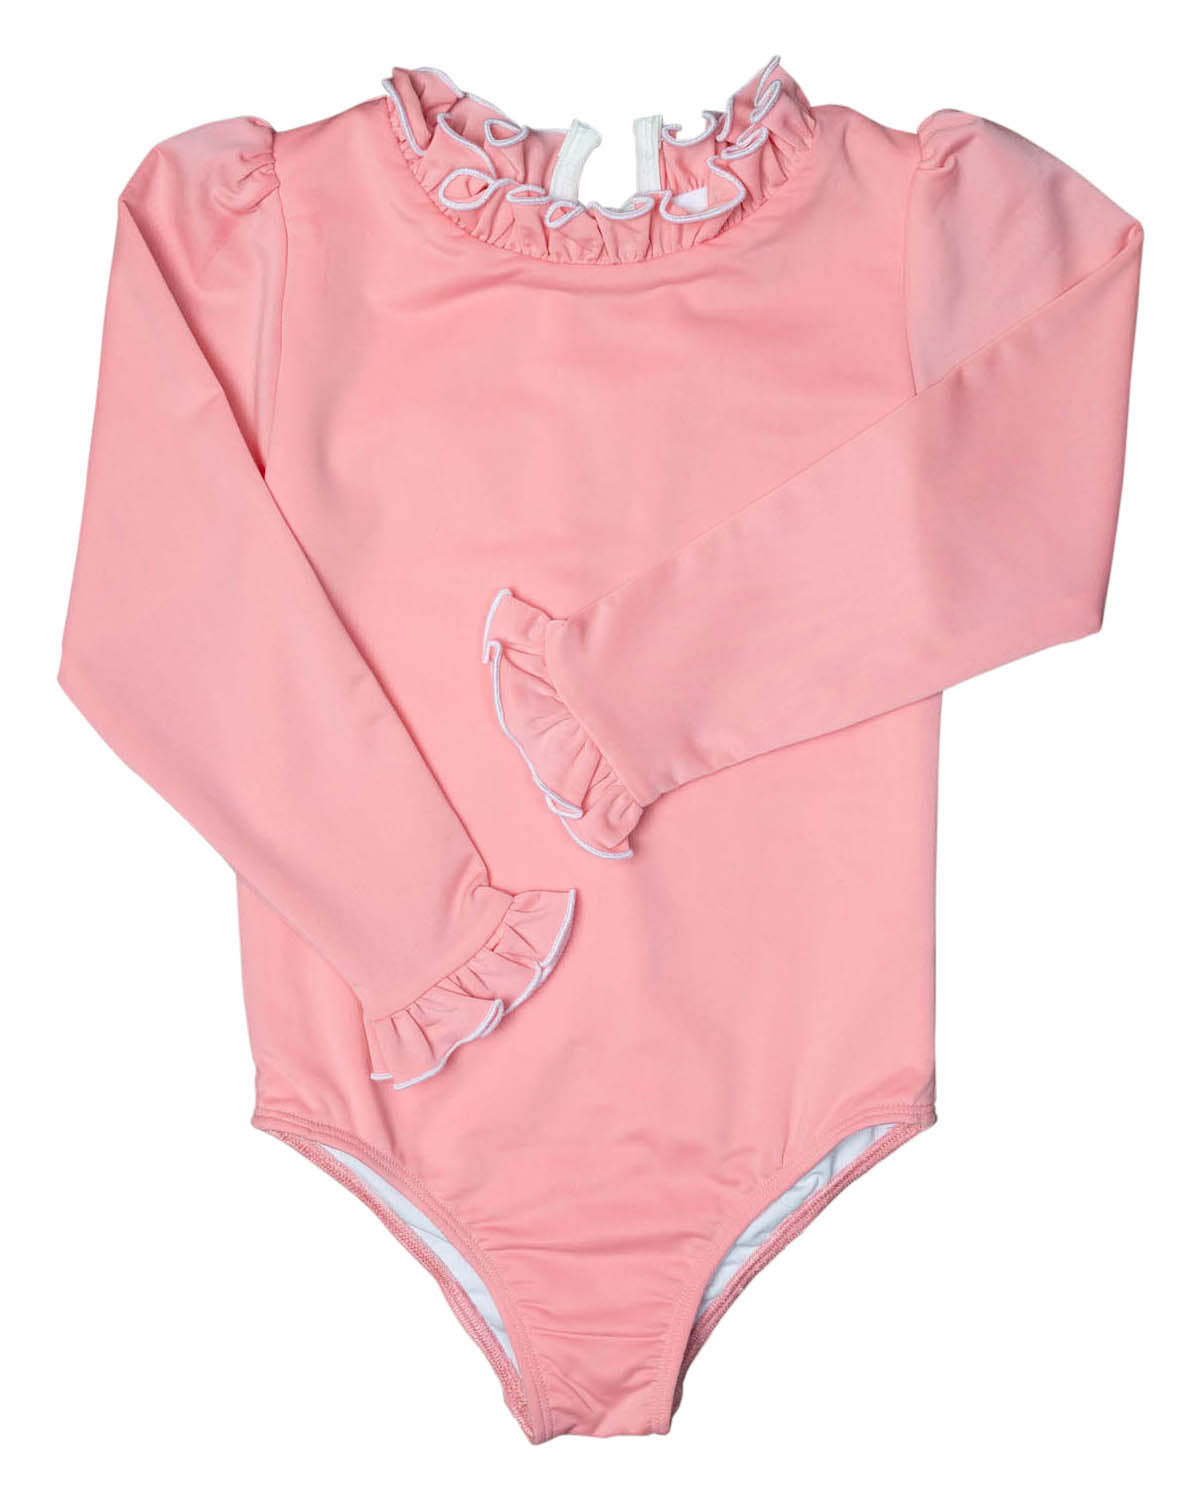 Cherry Blossom Pink Long Sleeved One Piece-FINAL SALE